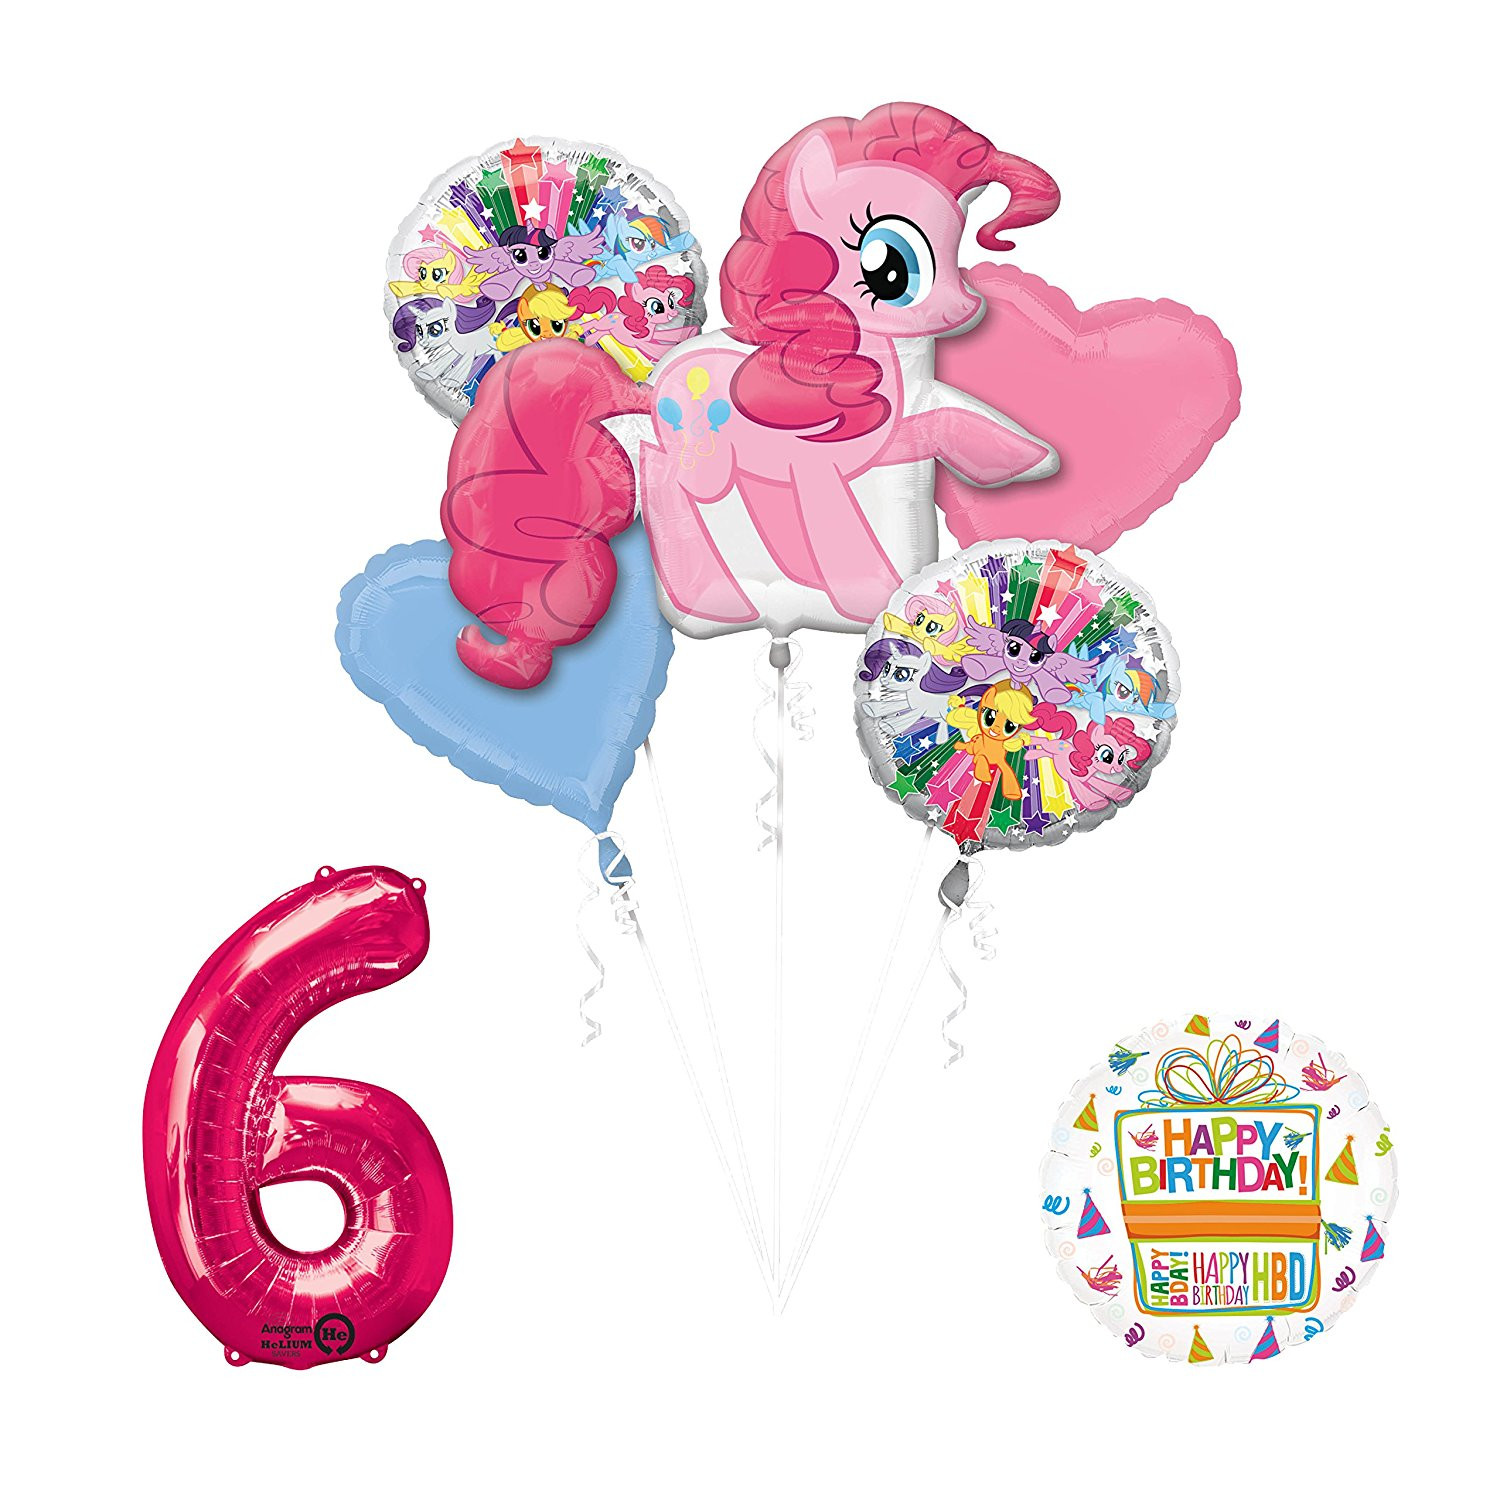 6th Birthday Party Ideas
 My Little Pony Pinkie Pie 6th Birthday Party Supplies and